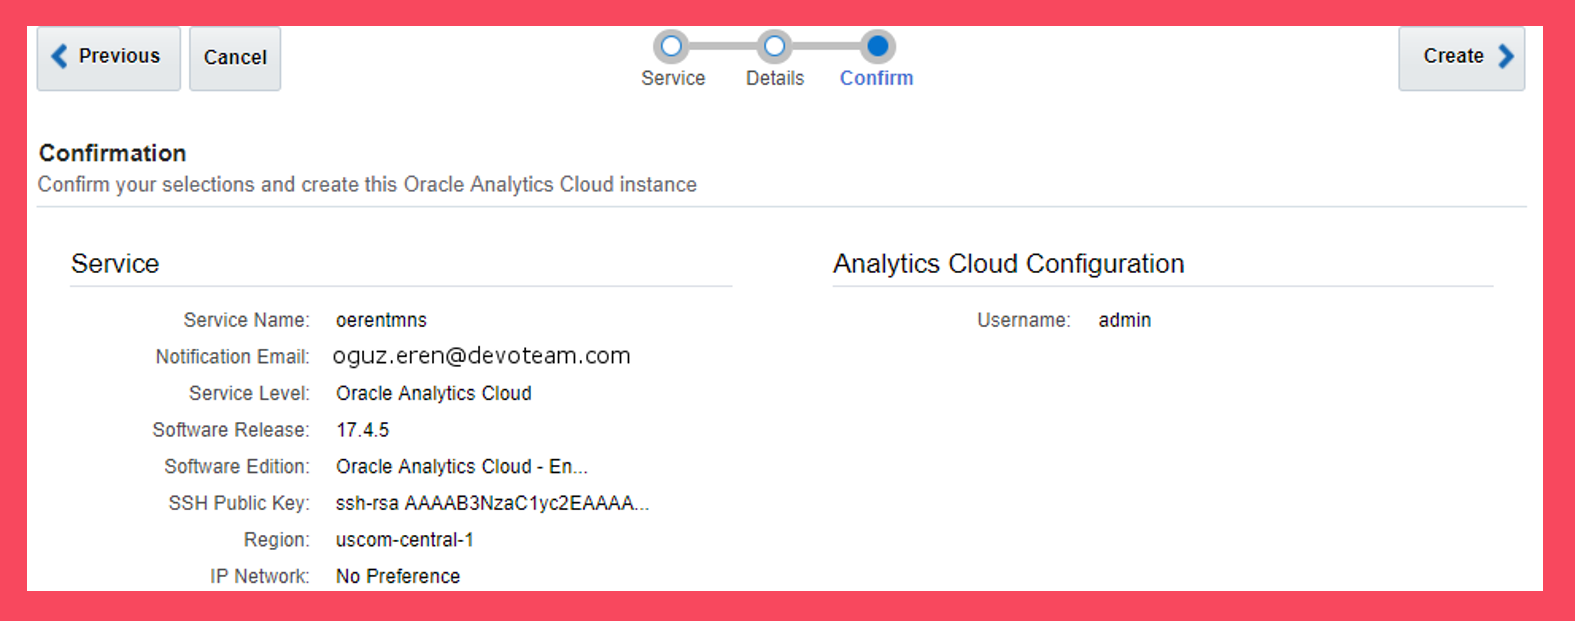 setting-up-oracle-analytics-cloud-step-2-create-a-service-instance-devoteam-5